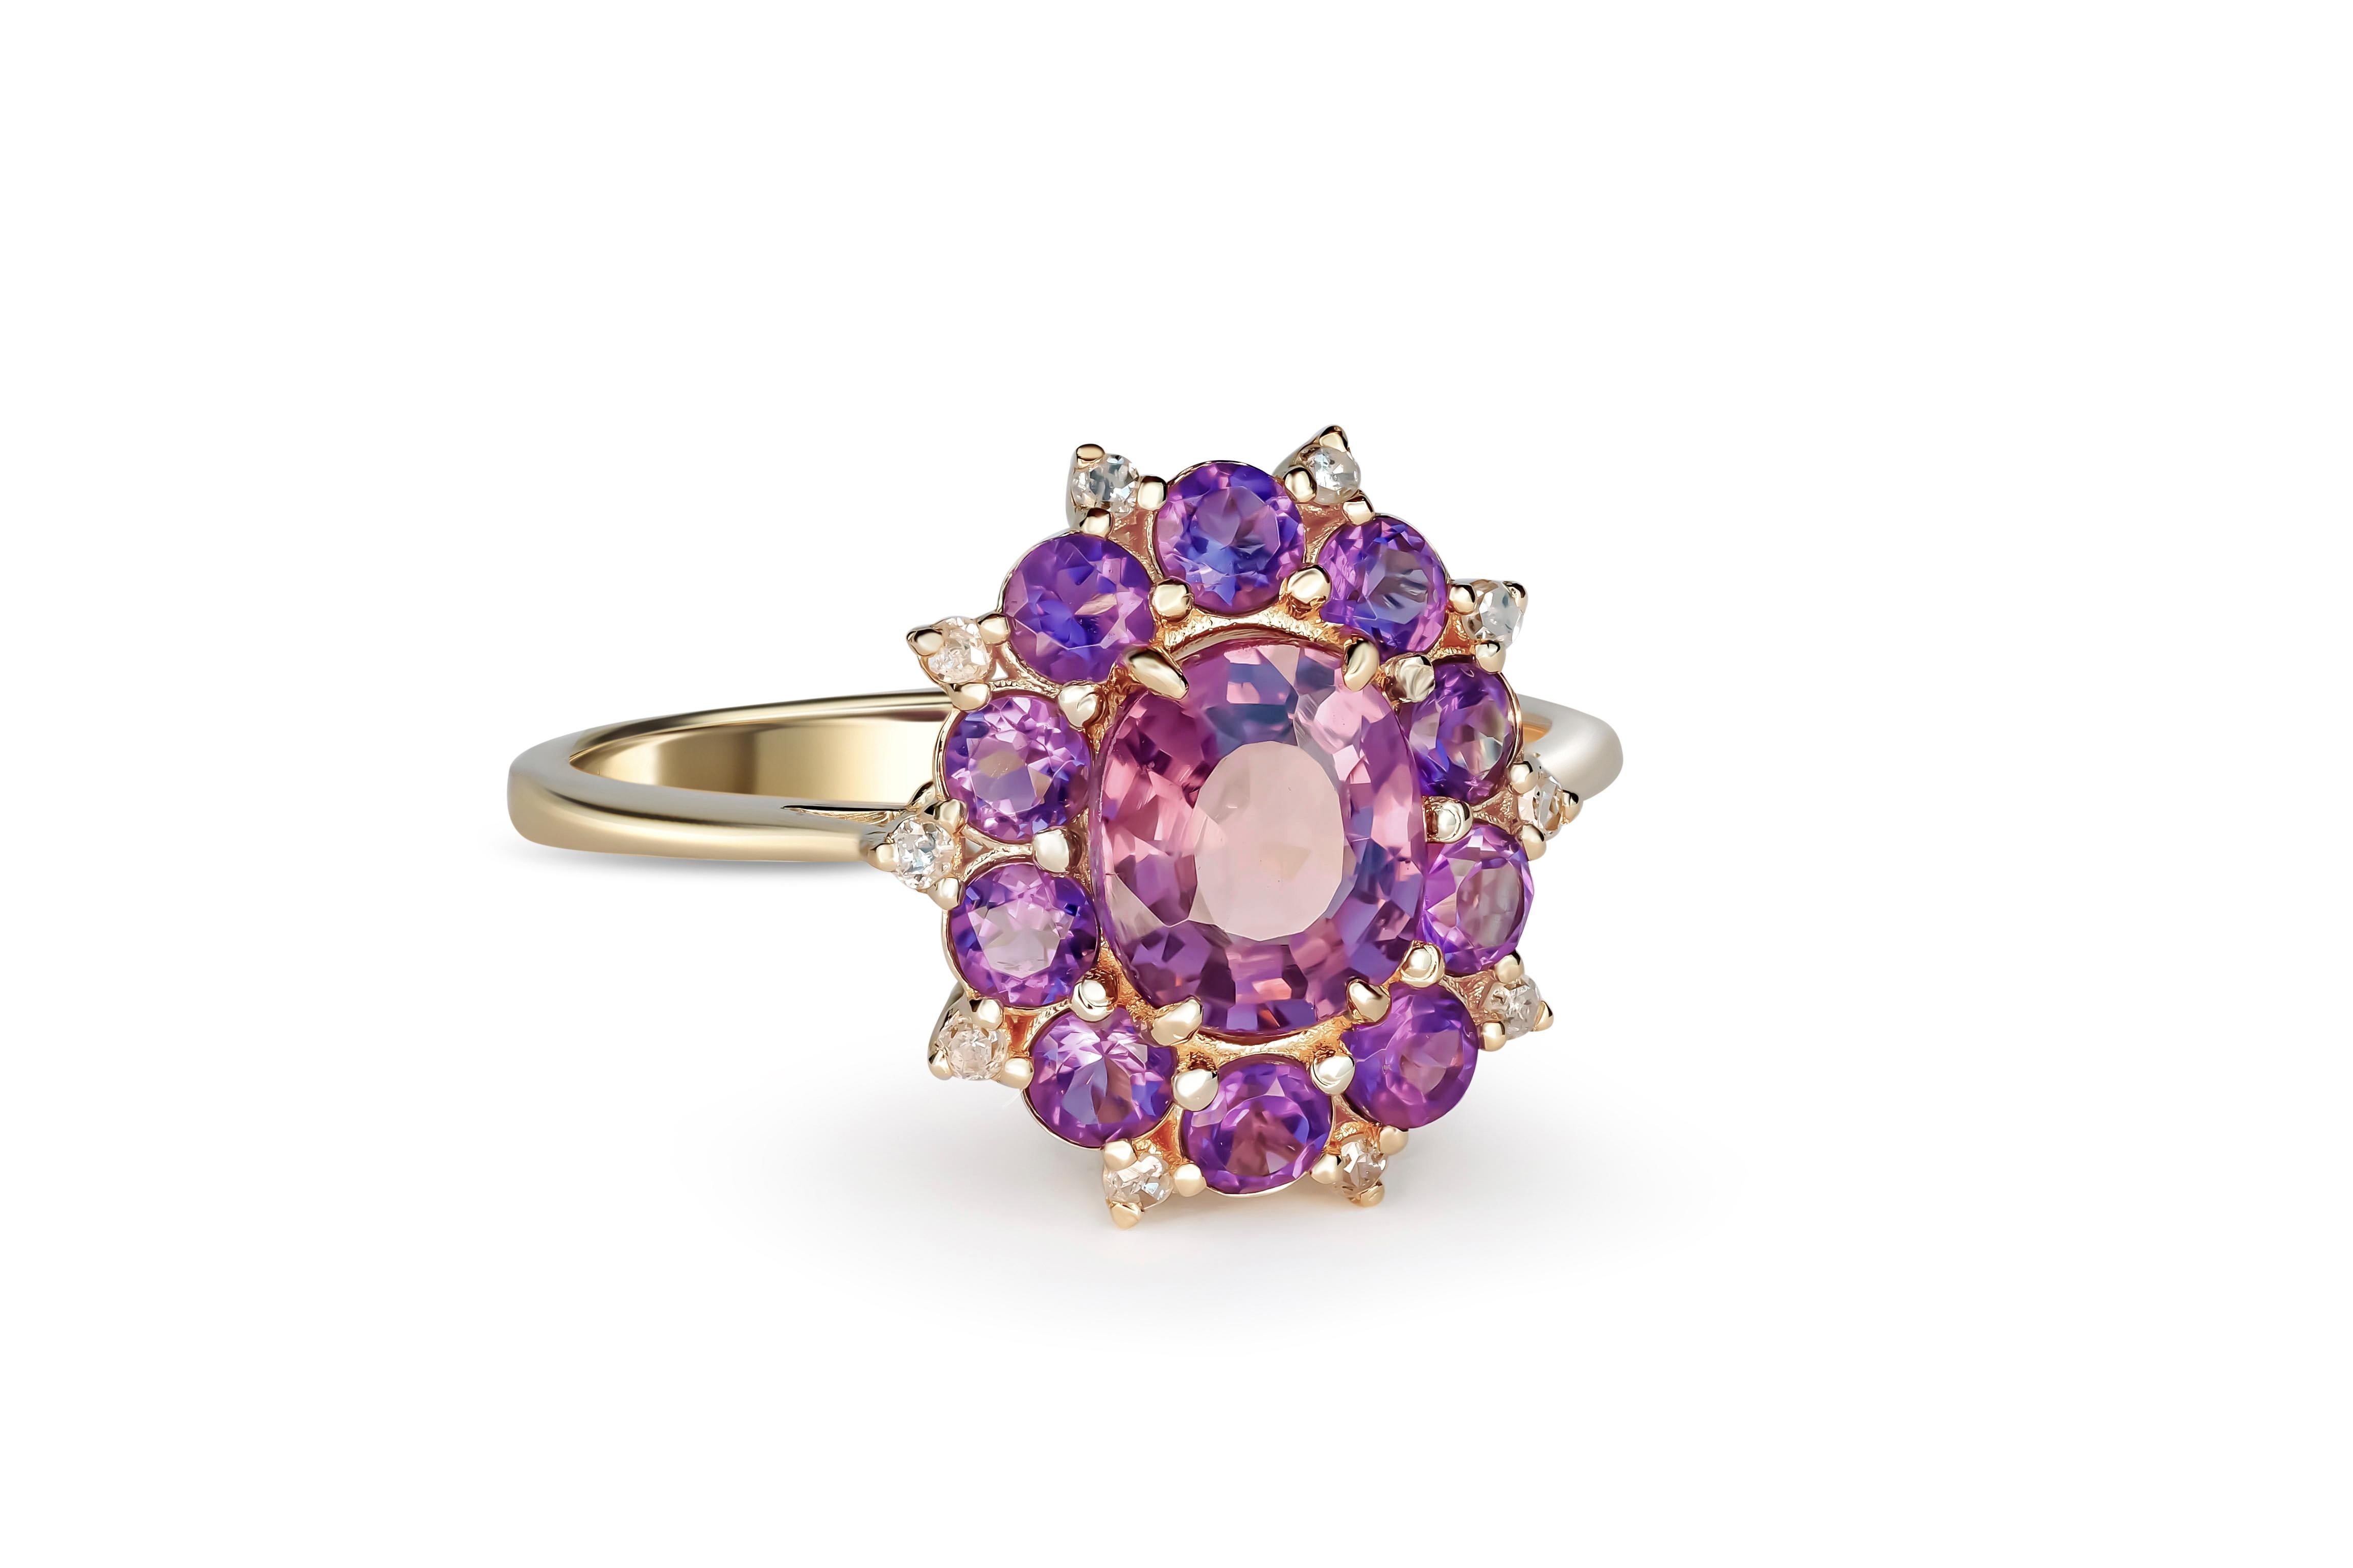 Lavender genuine spinel and side amethysts and diamonds 14 karat gold ring. August birthstone. February birthstone.
Total weight: 2.54 g.
Central stone: Genuine spinel
Weight - 1.60 ct.
Oval cut, color - lavender, Very Peri (Pantone color of the